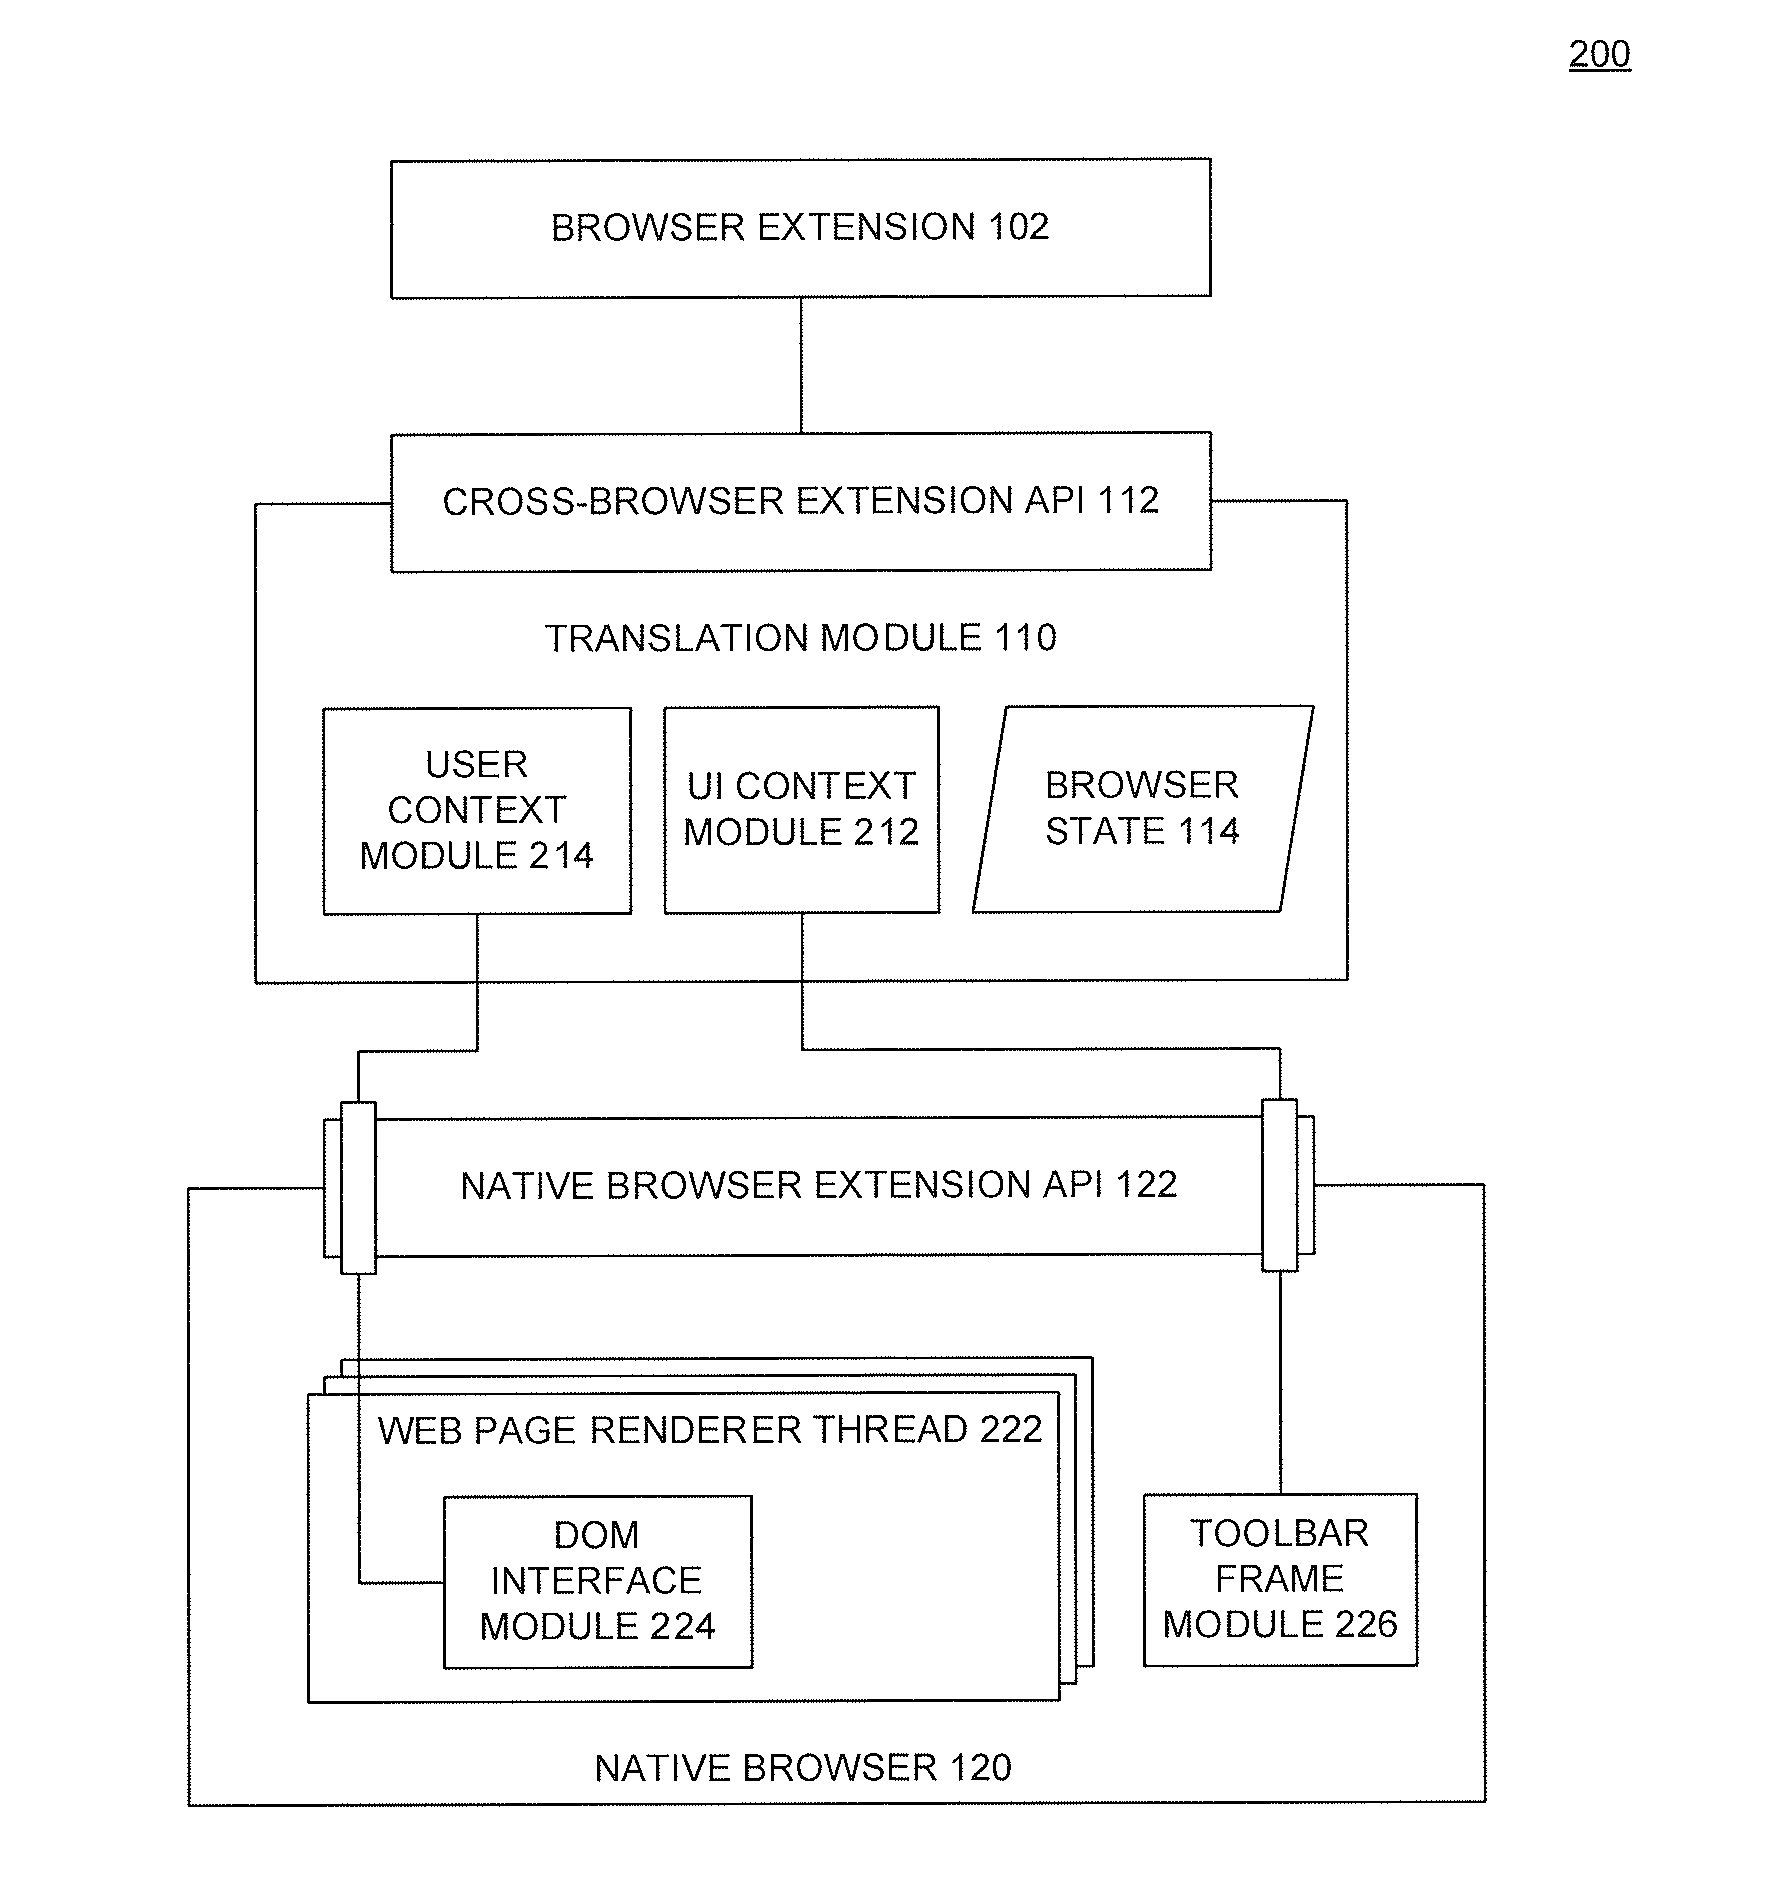 Interfaces to enable cross-browser extensions and applications thereof